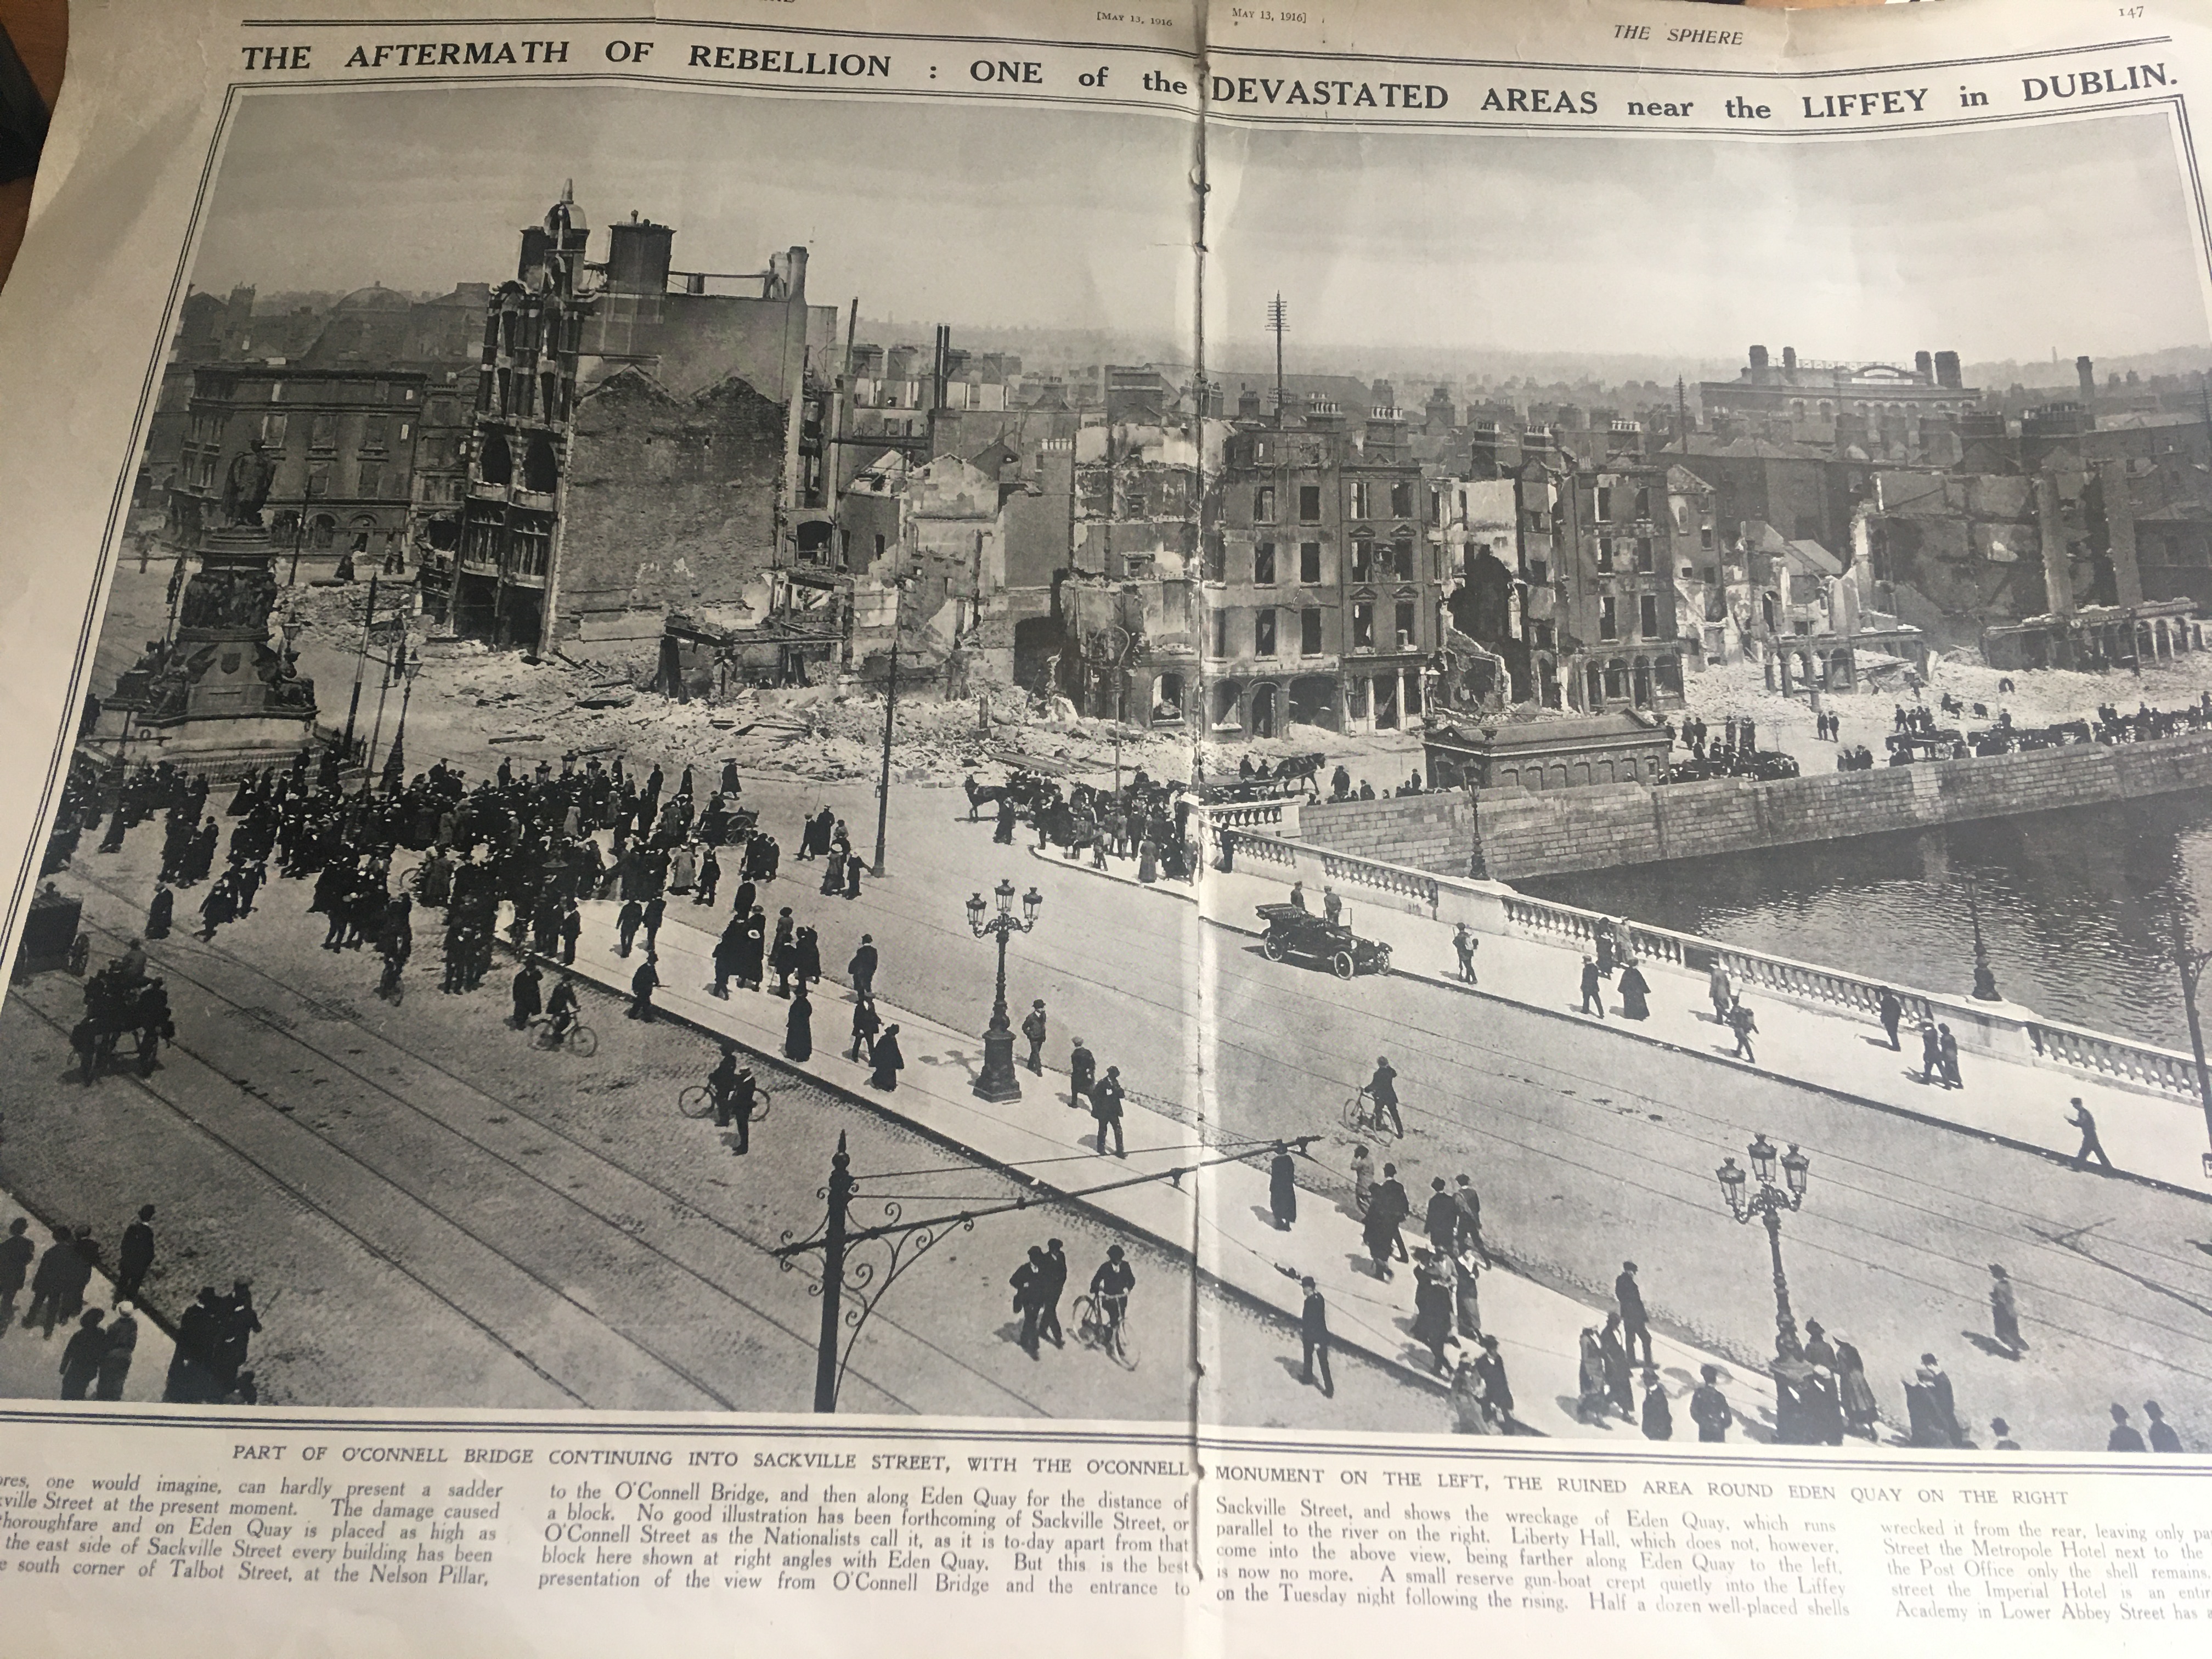 Double Centre Page The Sphere Newspaper The Aftermath of The Easter Rising